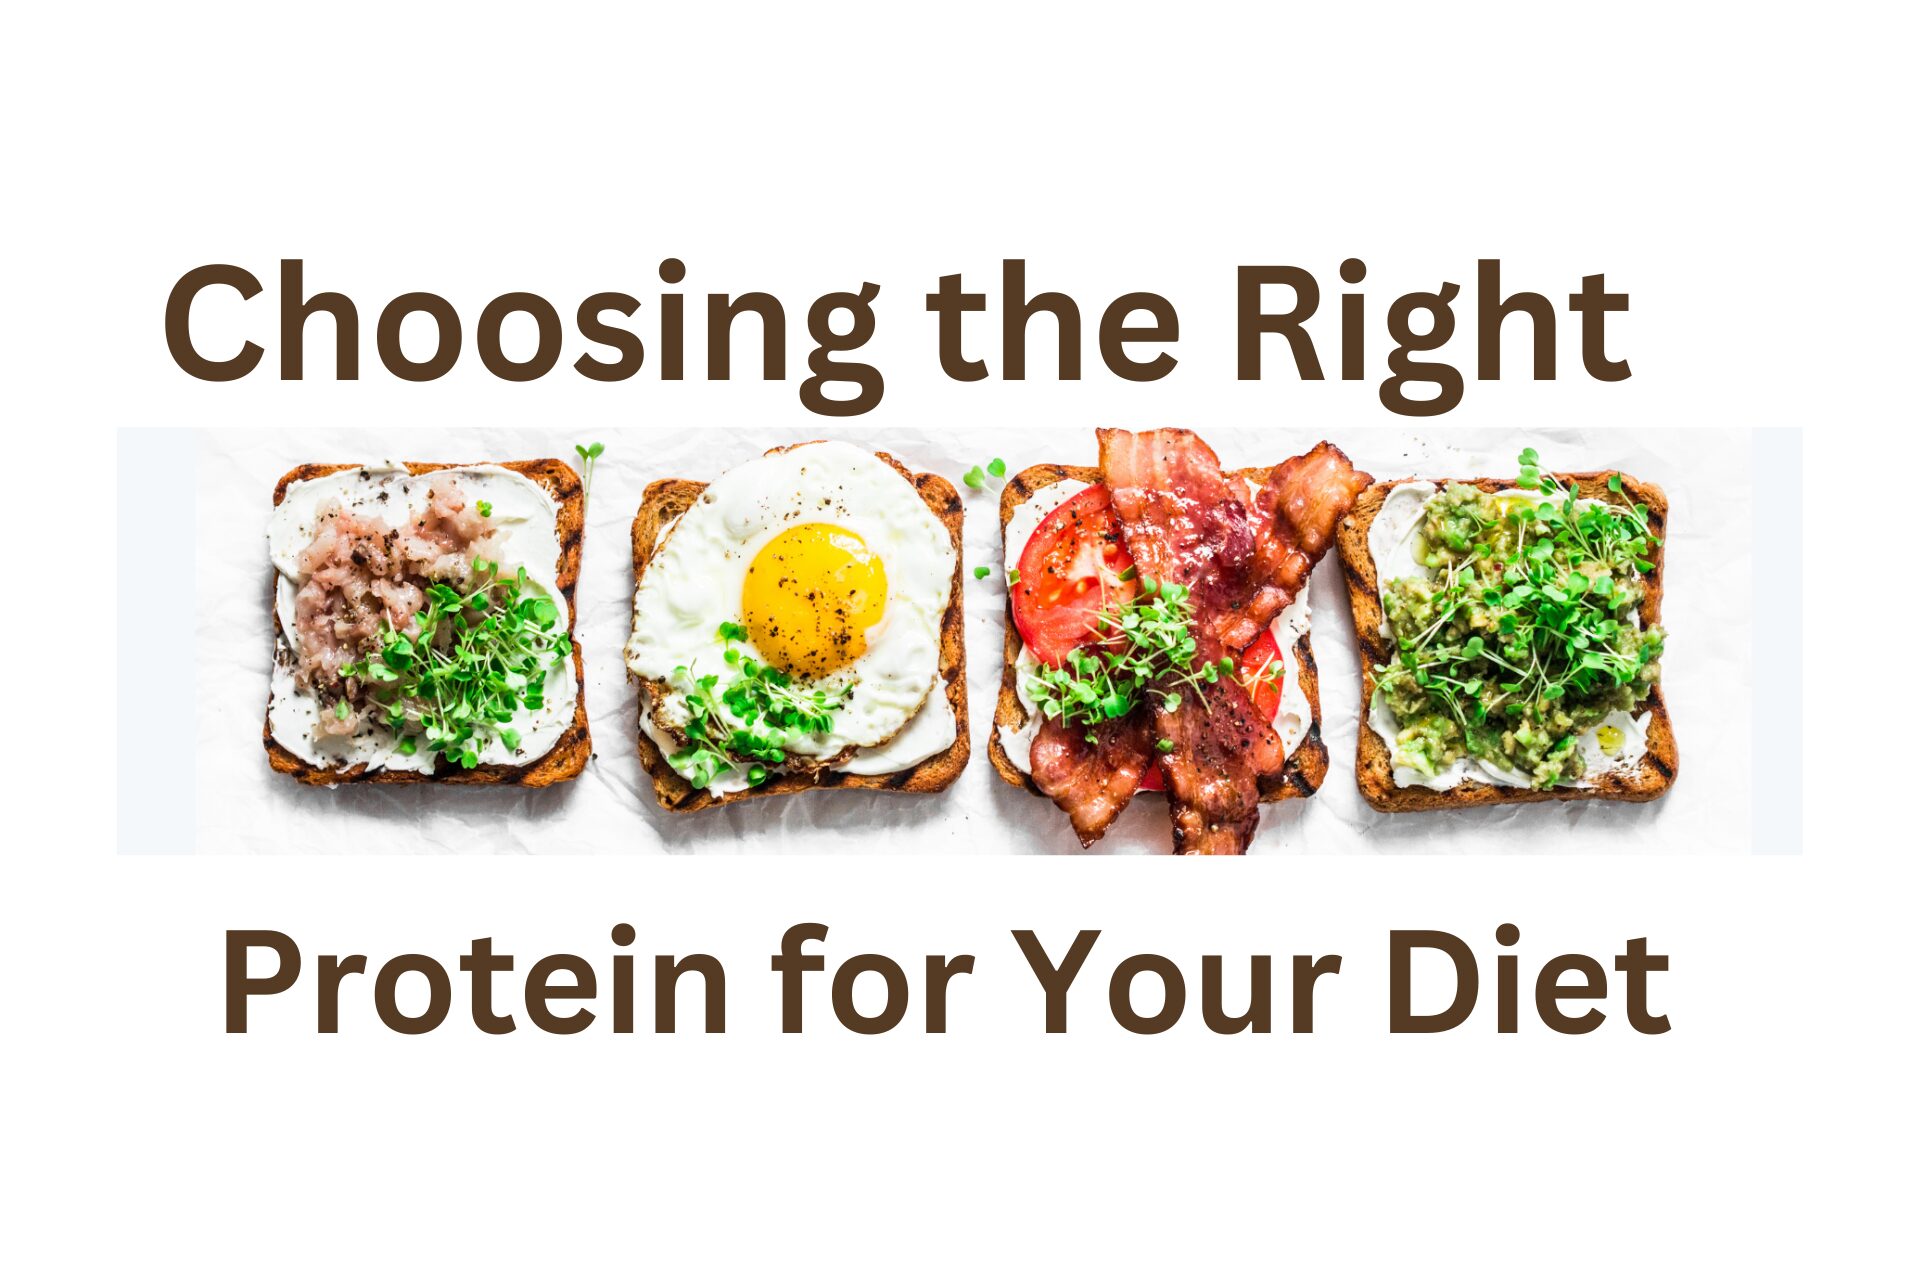 Choosing the right protein for your lifestyle diet